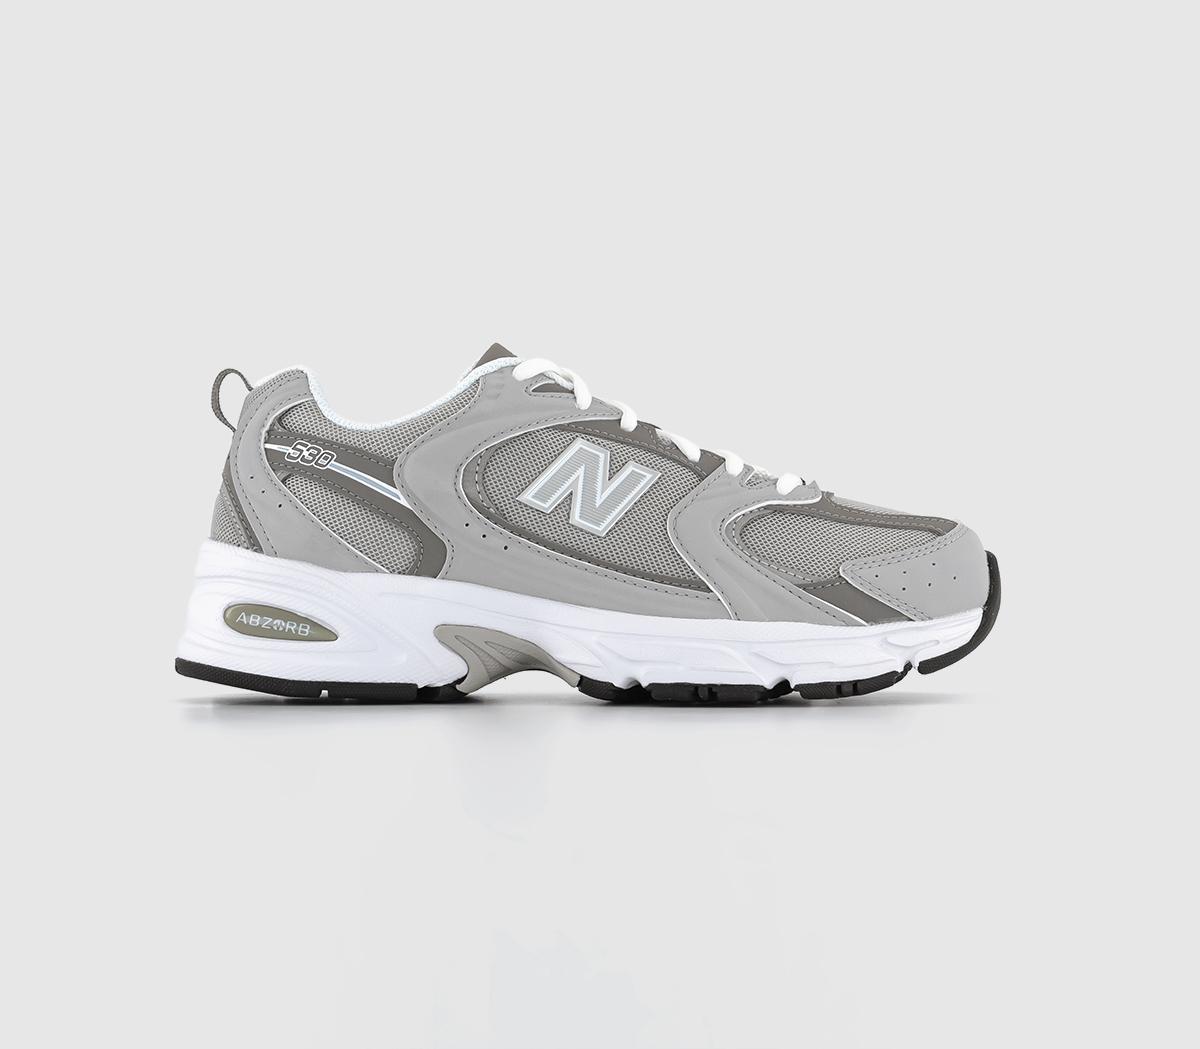 New Balance Mr530 Trainers Grey Silver White - Unisex Sports